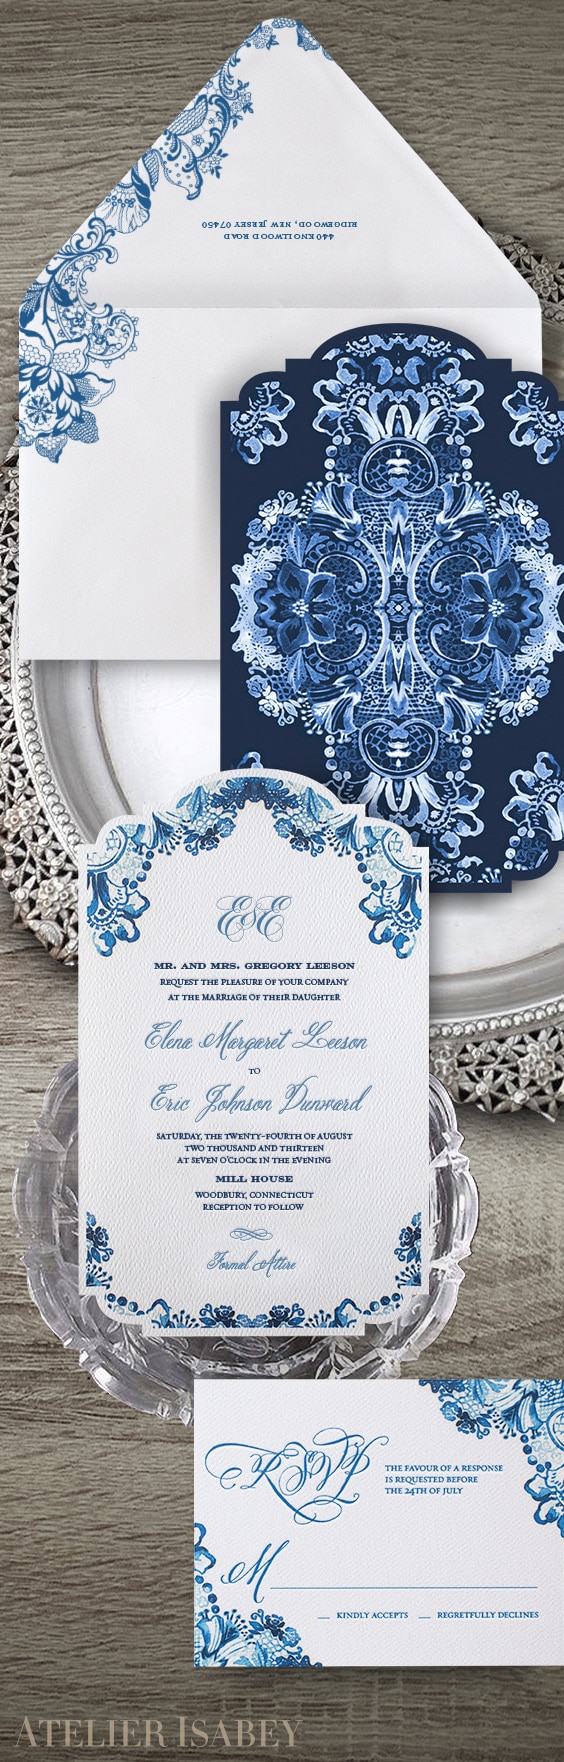 Blue and white watercolor lace wedding invitation | By Atelier Isabey